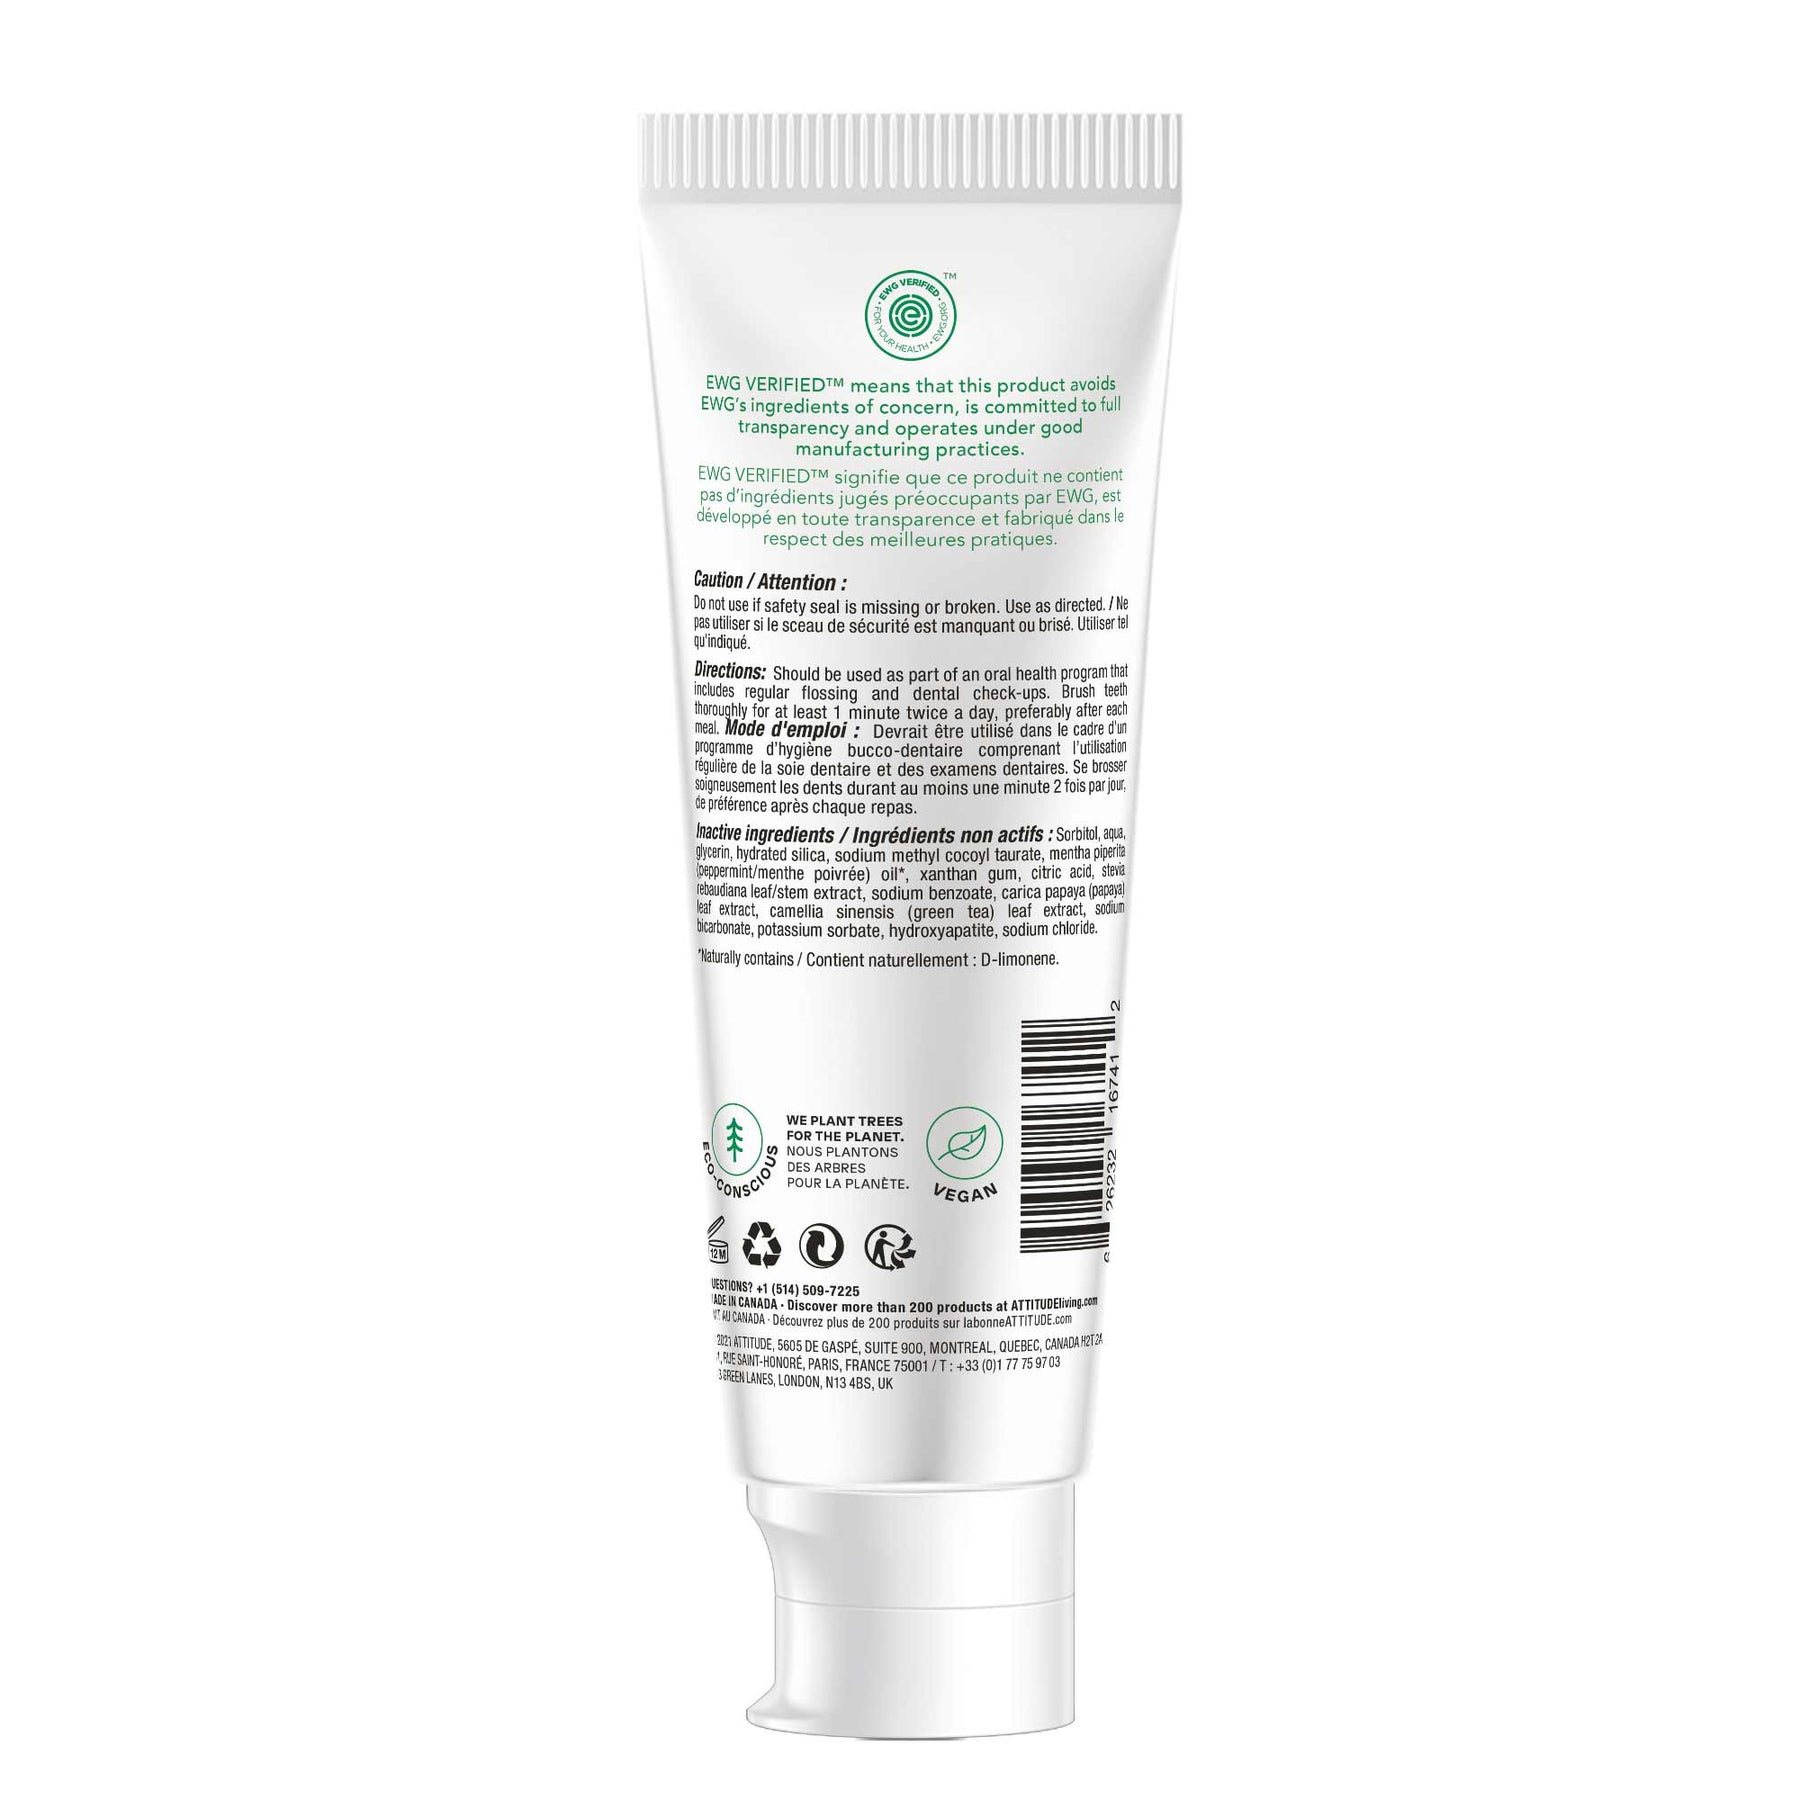 Fluoride Free Adult Toothpaste : Whitening - ProCare Outlet by Attitude